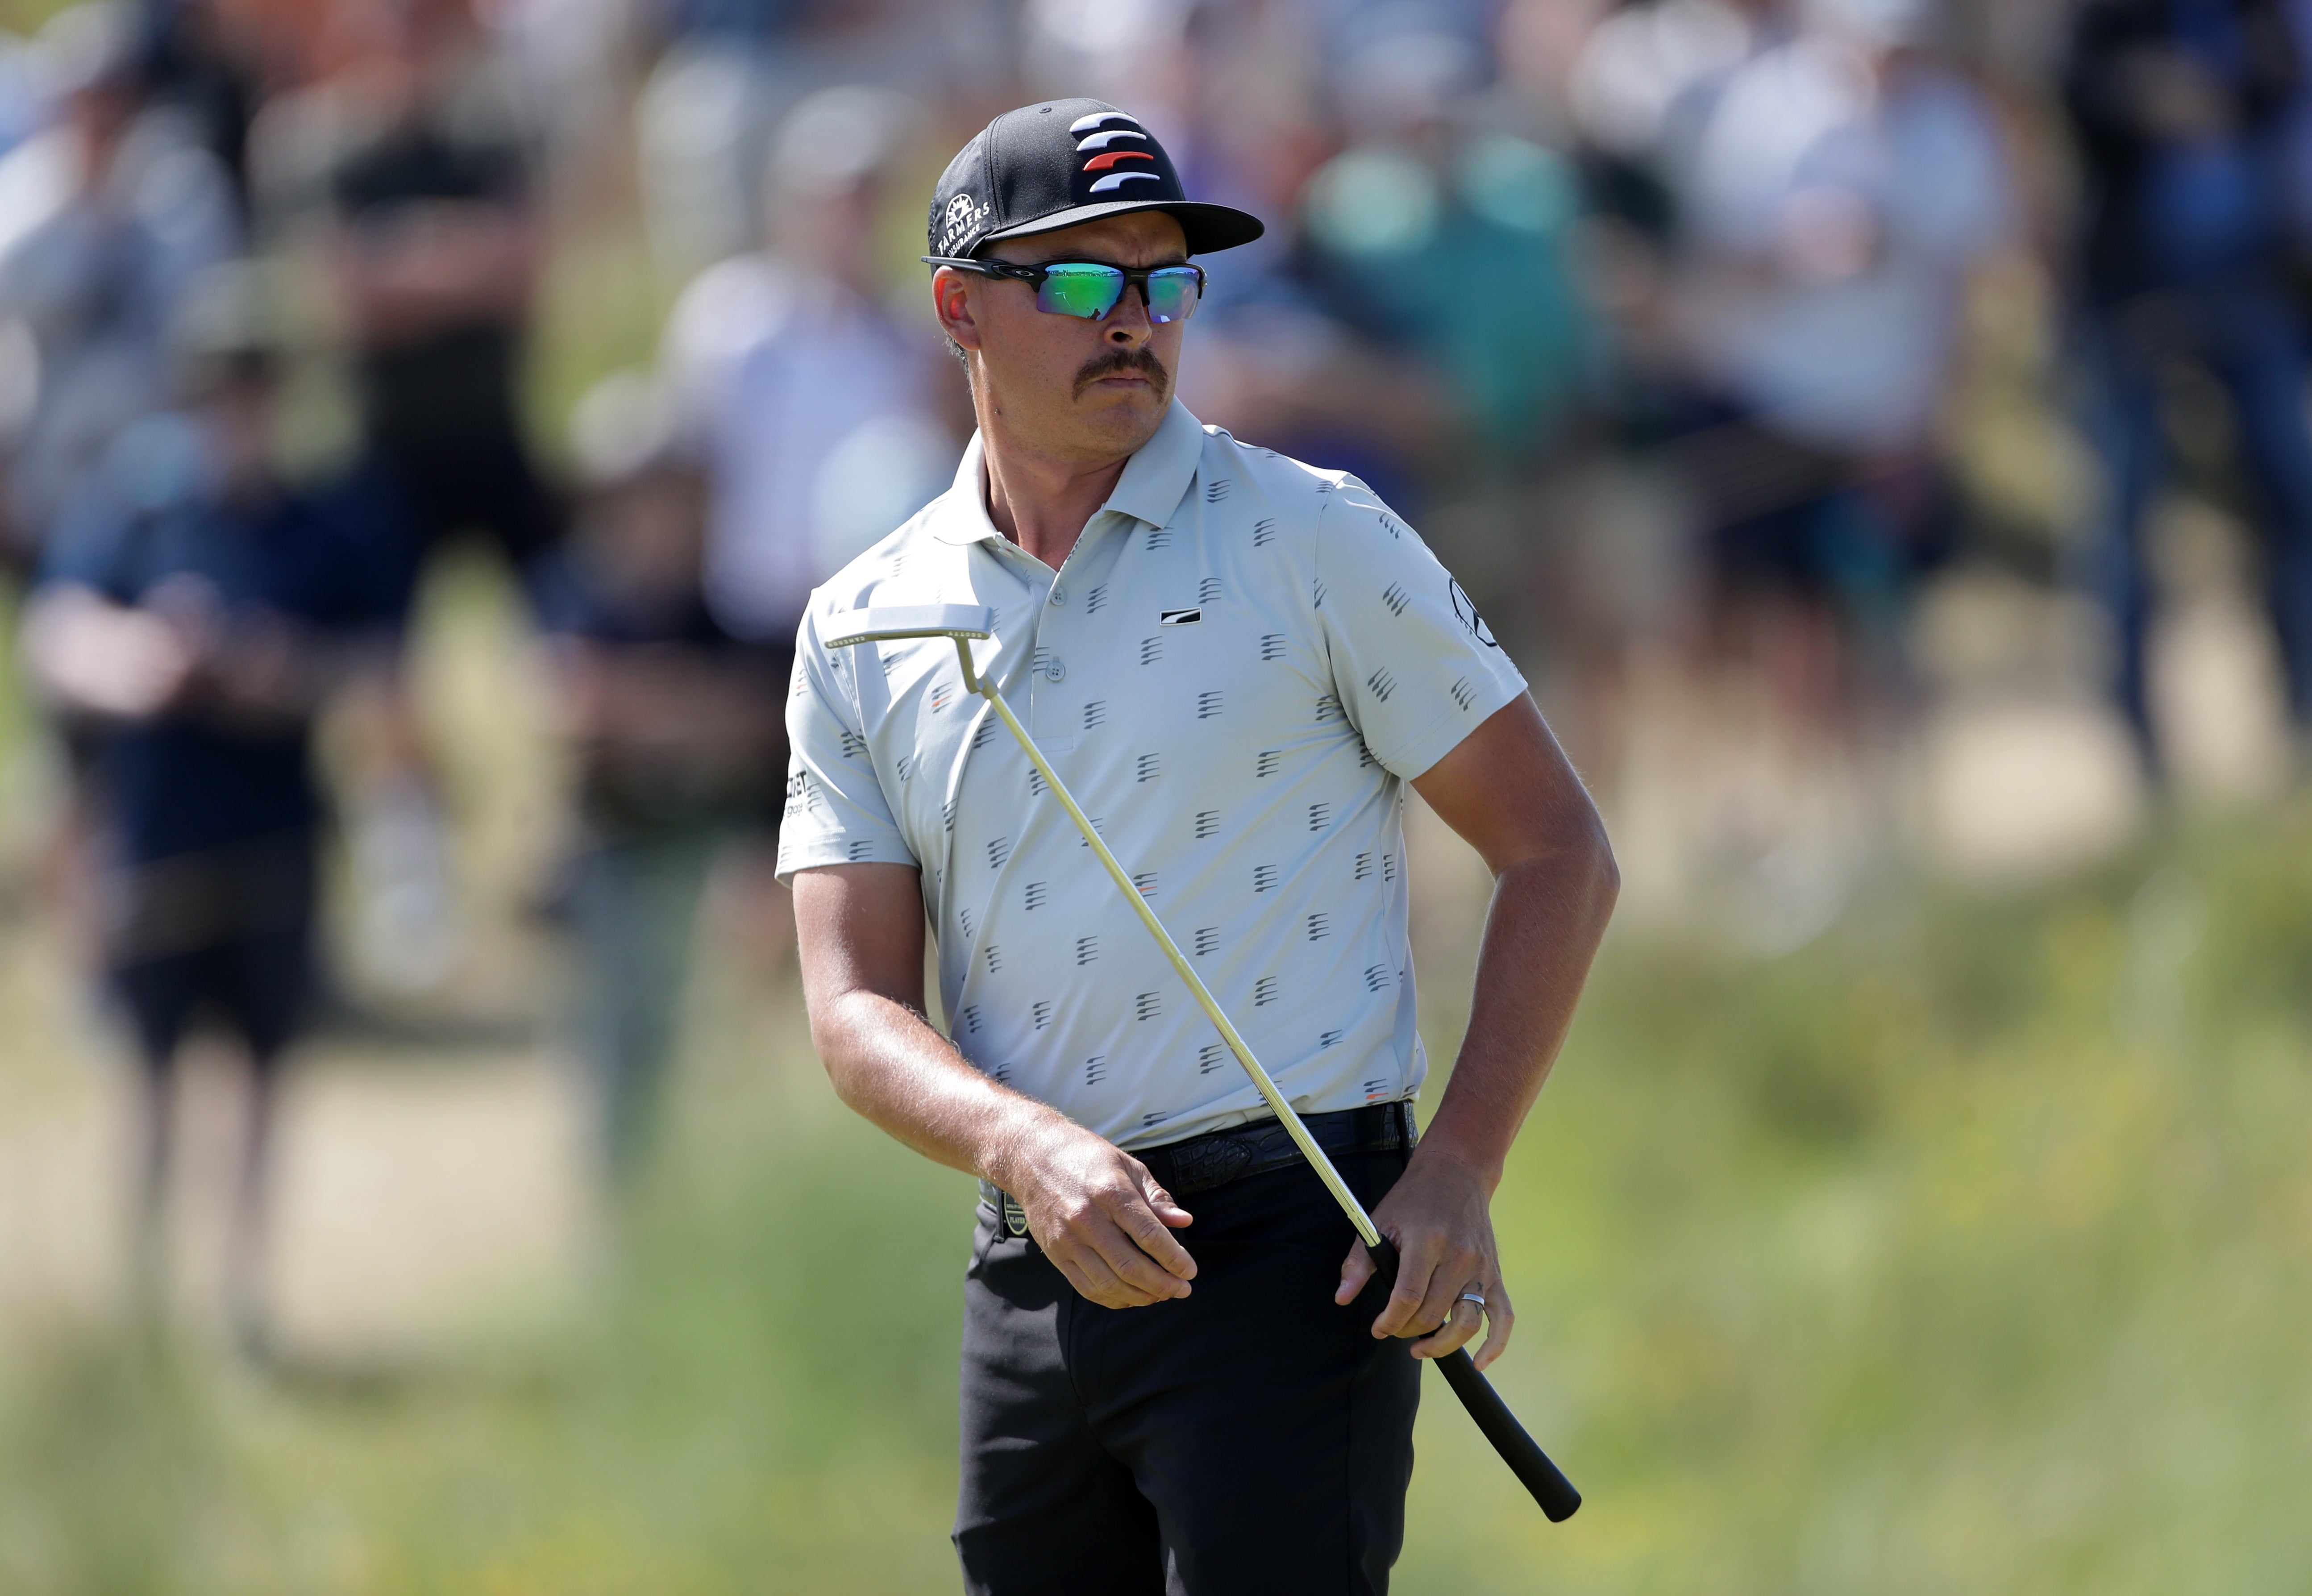 Rickie Fowler carded a final round of 65 in the 149th Open